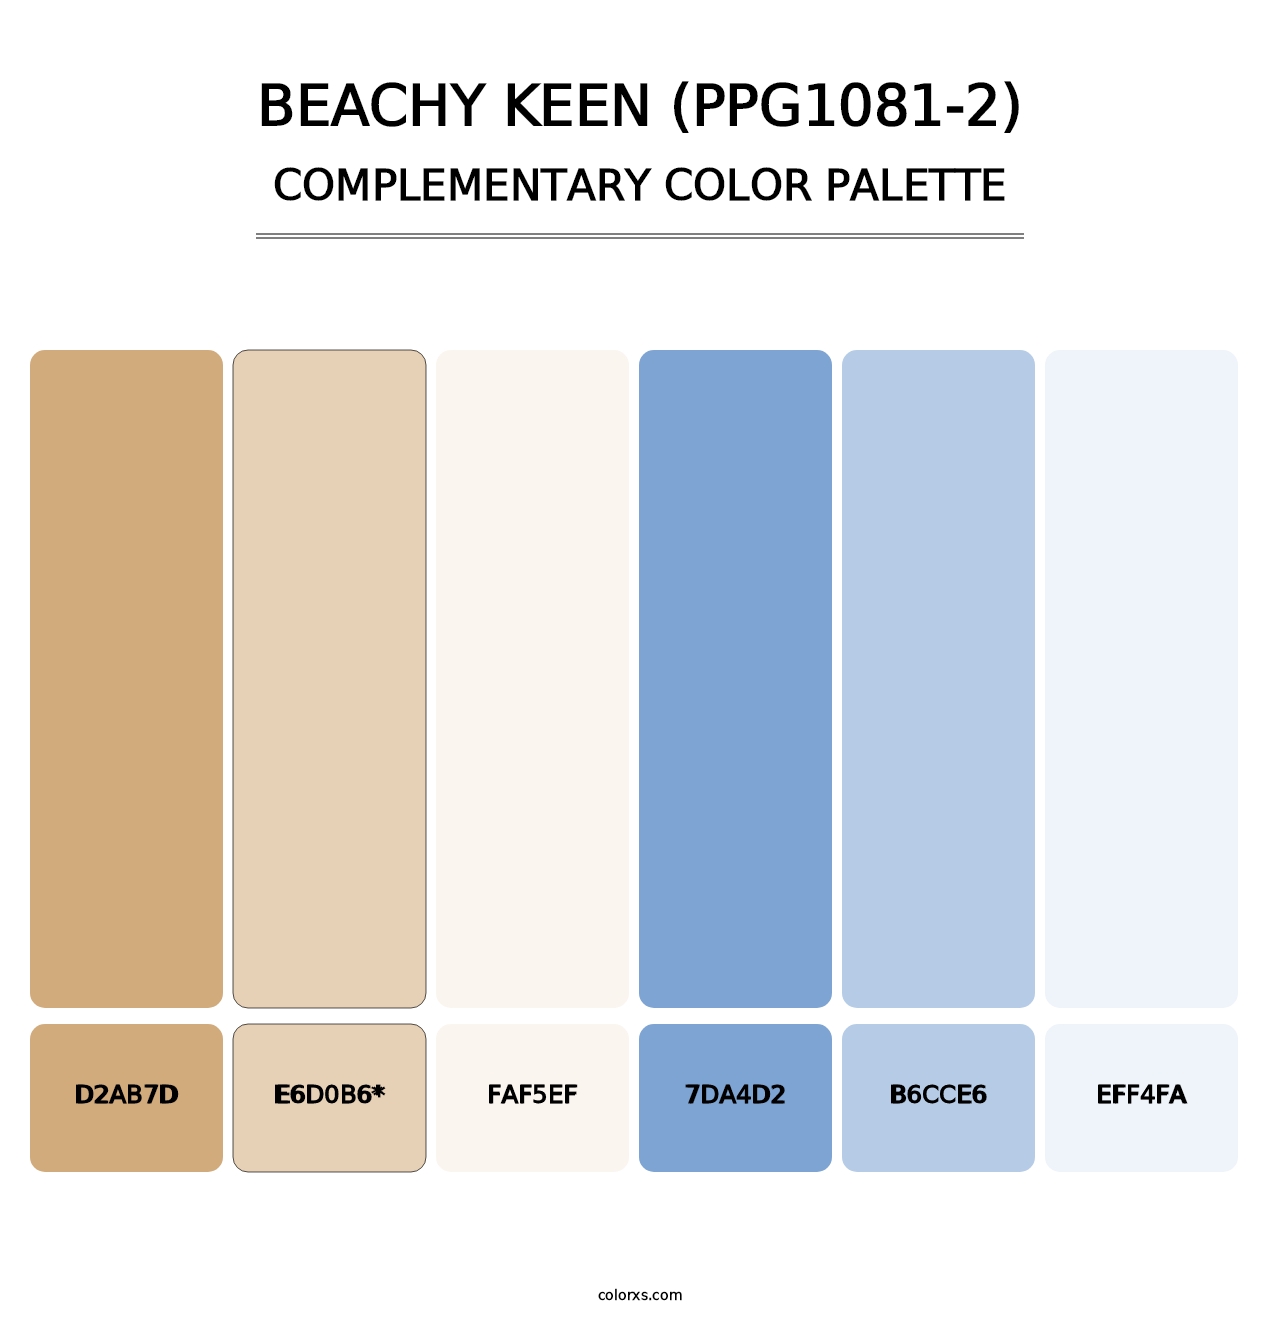 Beachy Keen (PPG1081-2) - Complementary Color Palette